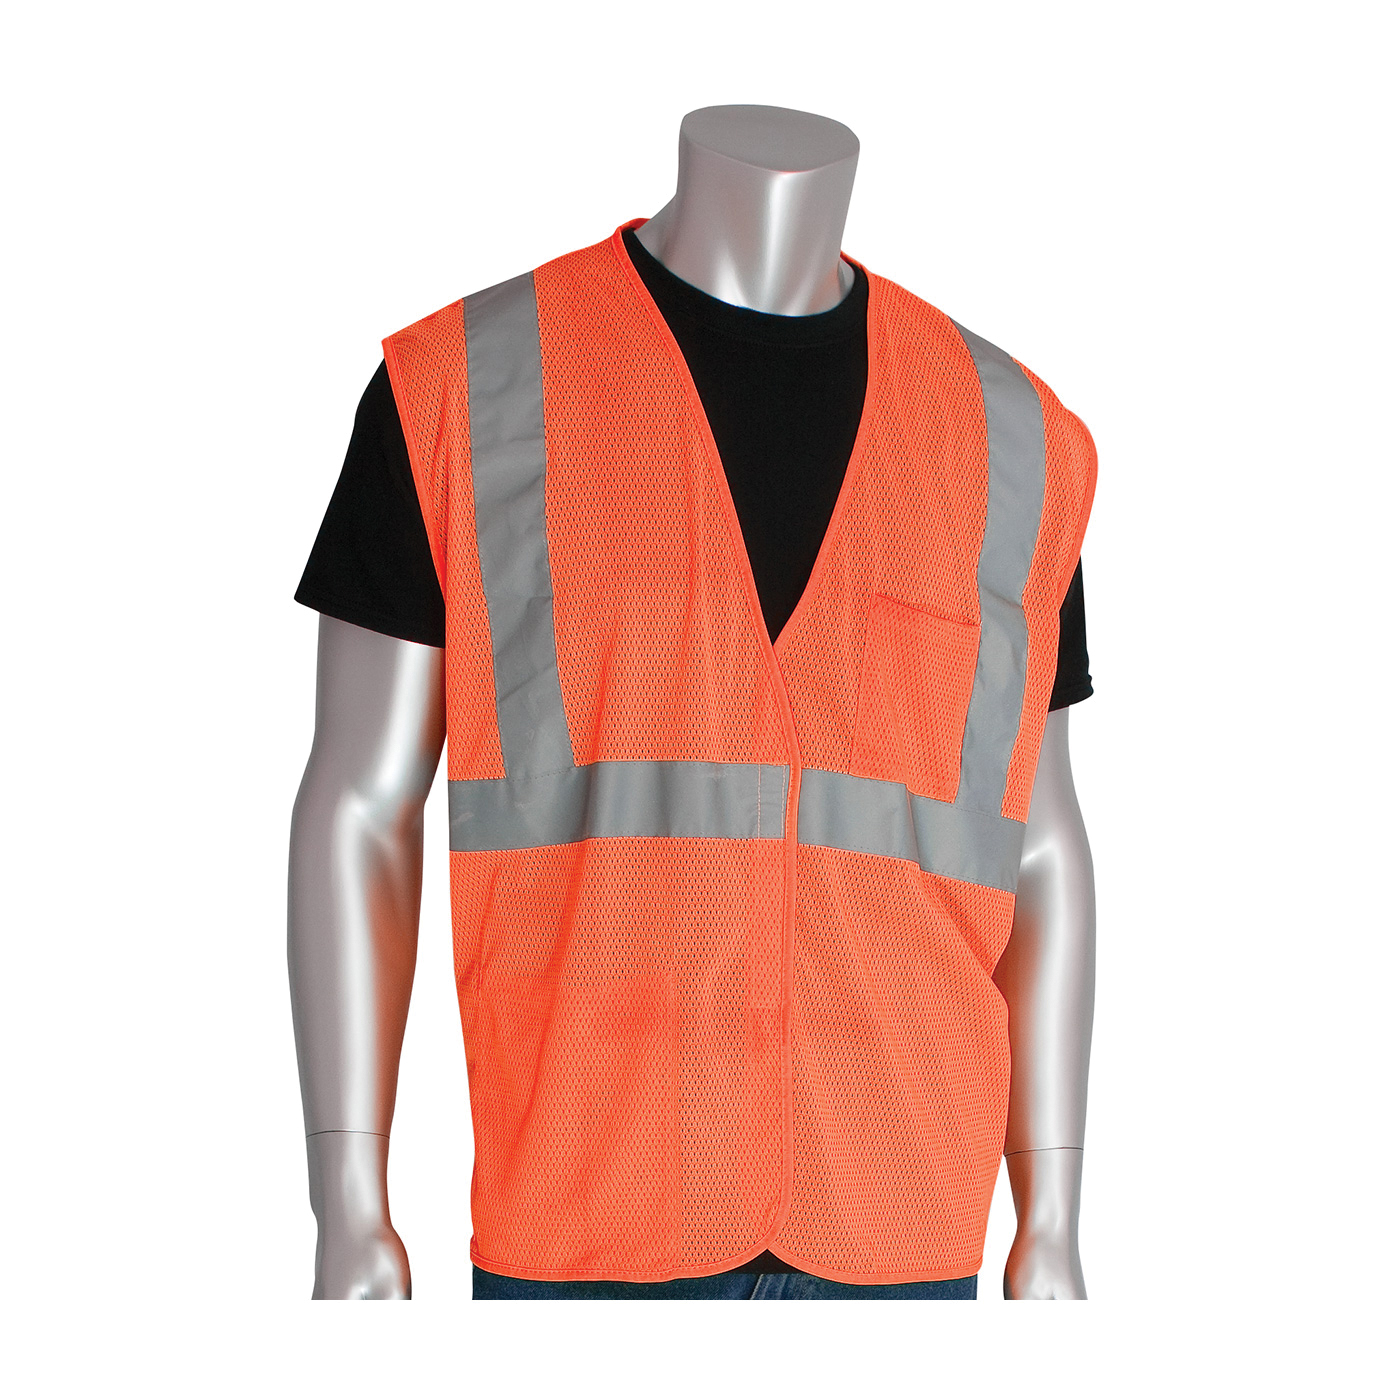 PIP® 302-0702-OR/S Safety Vest, S, Hi-Viz Orange, Polyester Mesh, Hook and Loop Closure, 2 Pockets, ANSI Class: Class 2, Specifications Met: ANSI 107 Type R